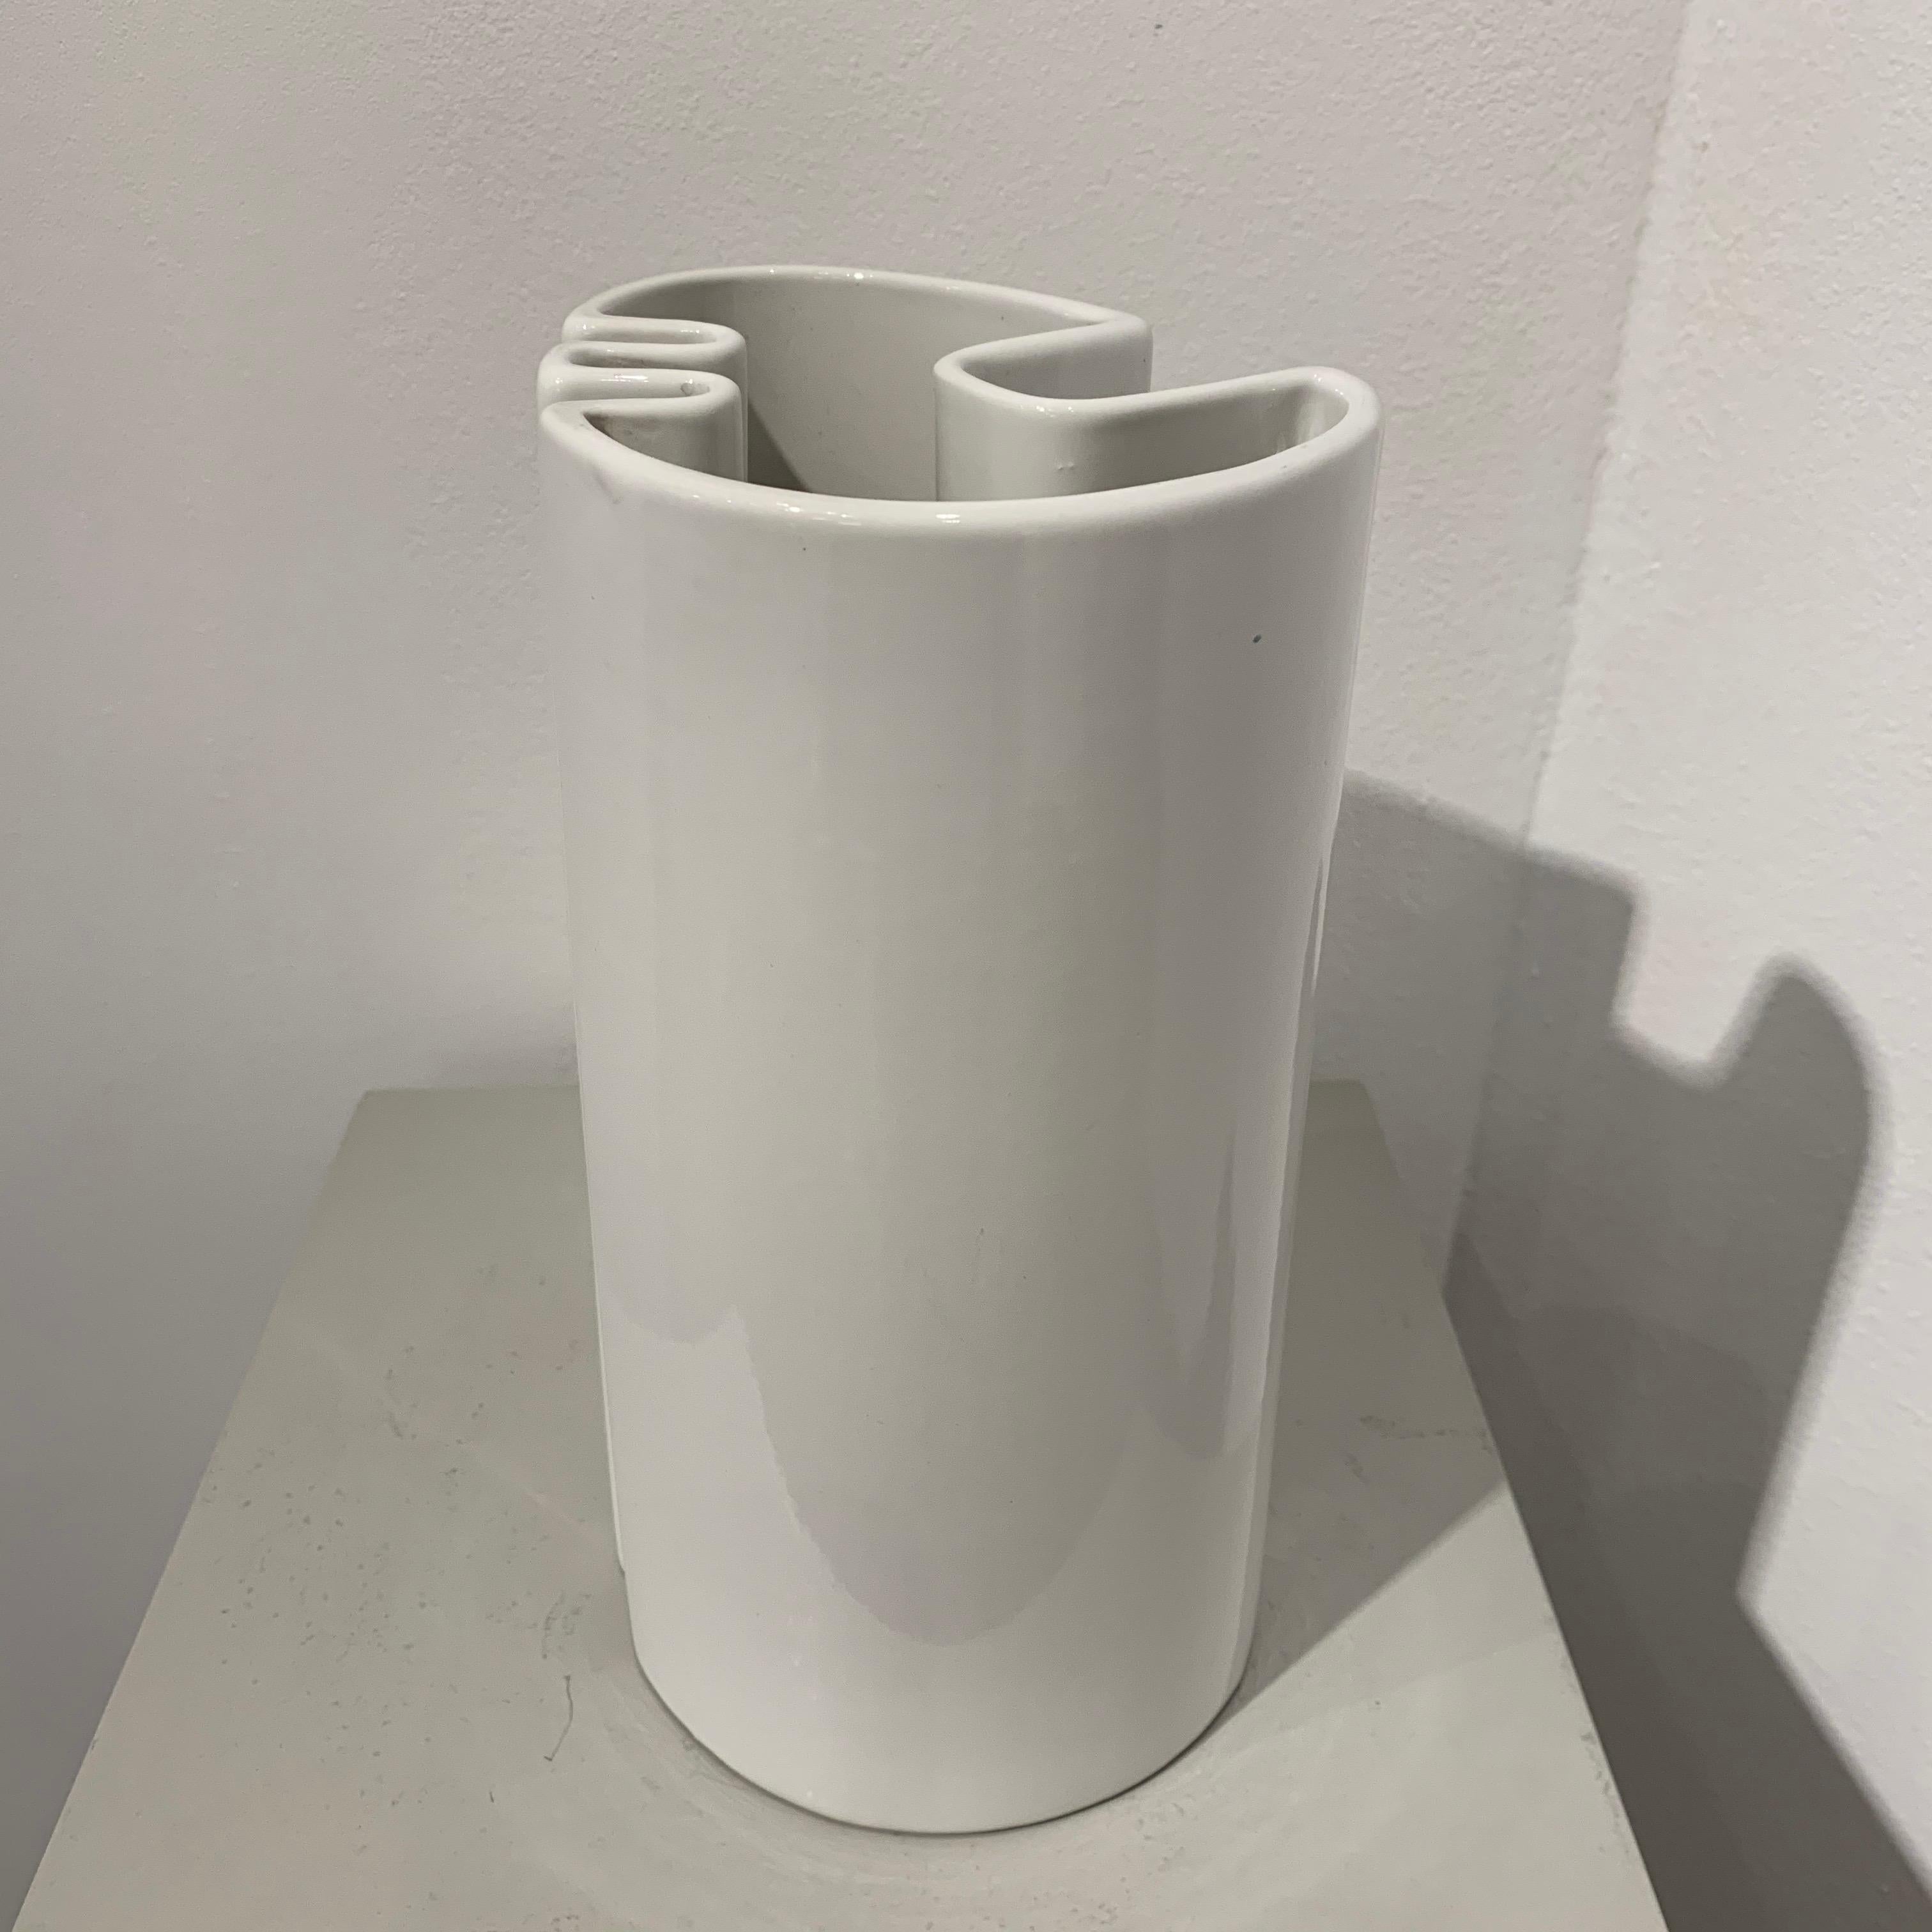 Fratelli Brambilla is the manufacture which produced the vase designed by Angelo Mangiarotti in the 1960s. The shape is irregular, free. Old sticker of Frattelli Brambilla missing, trace of old glue that can be removed. The mark is apparent.